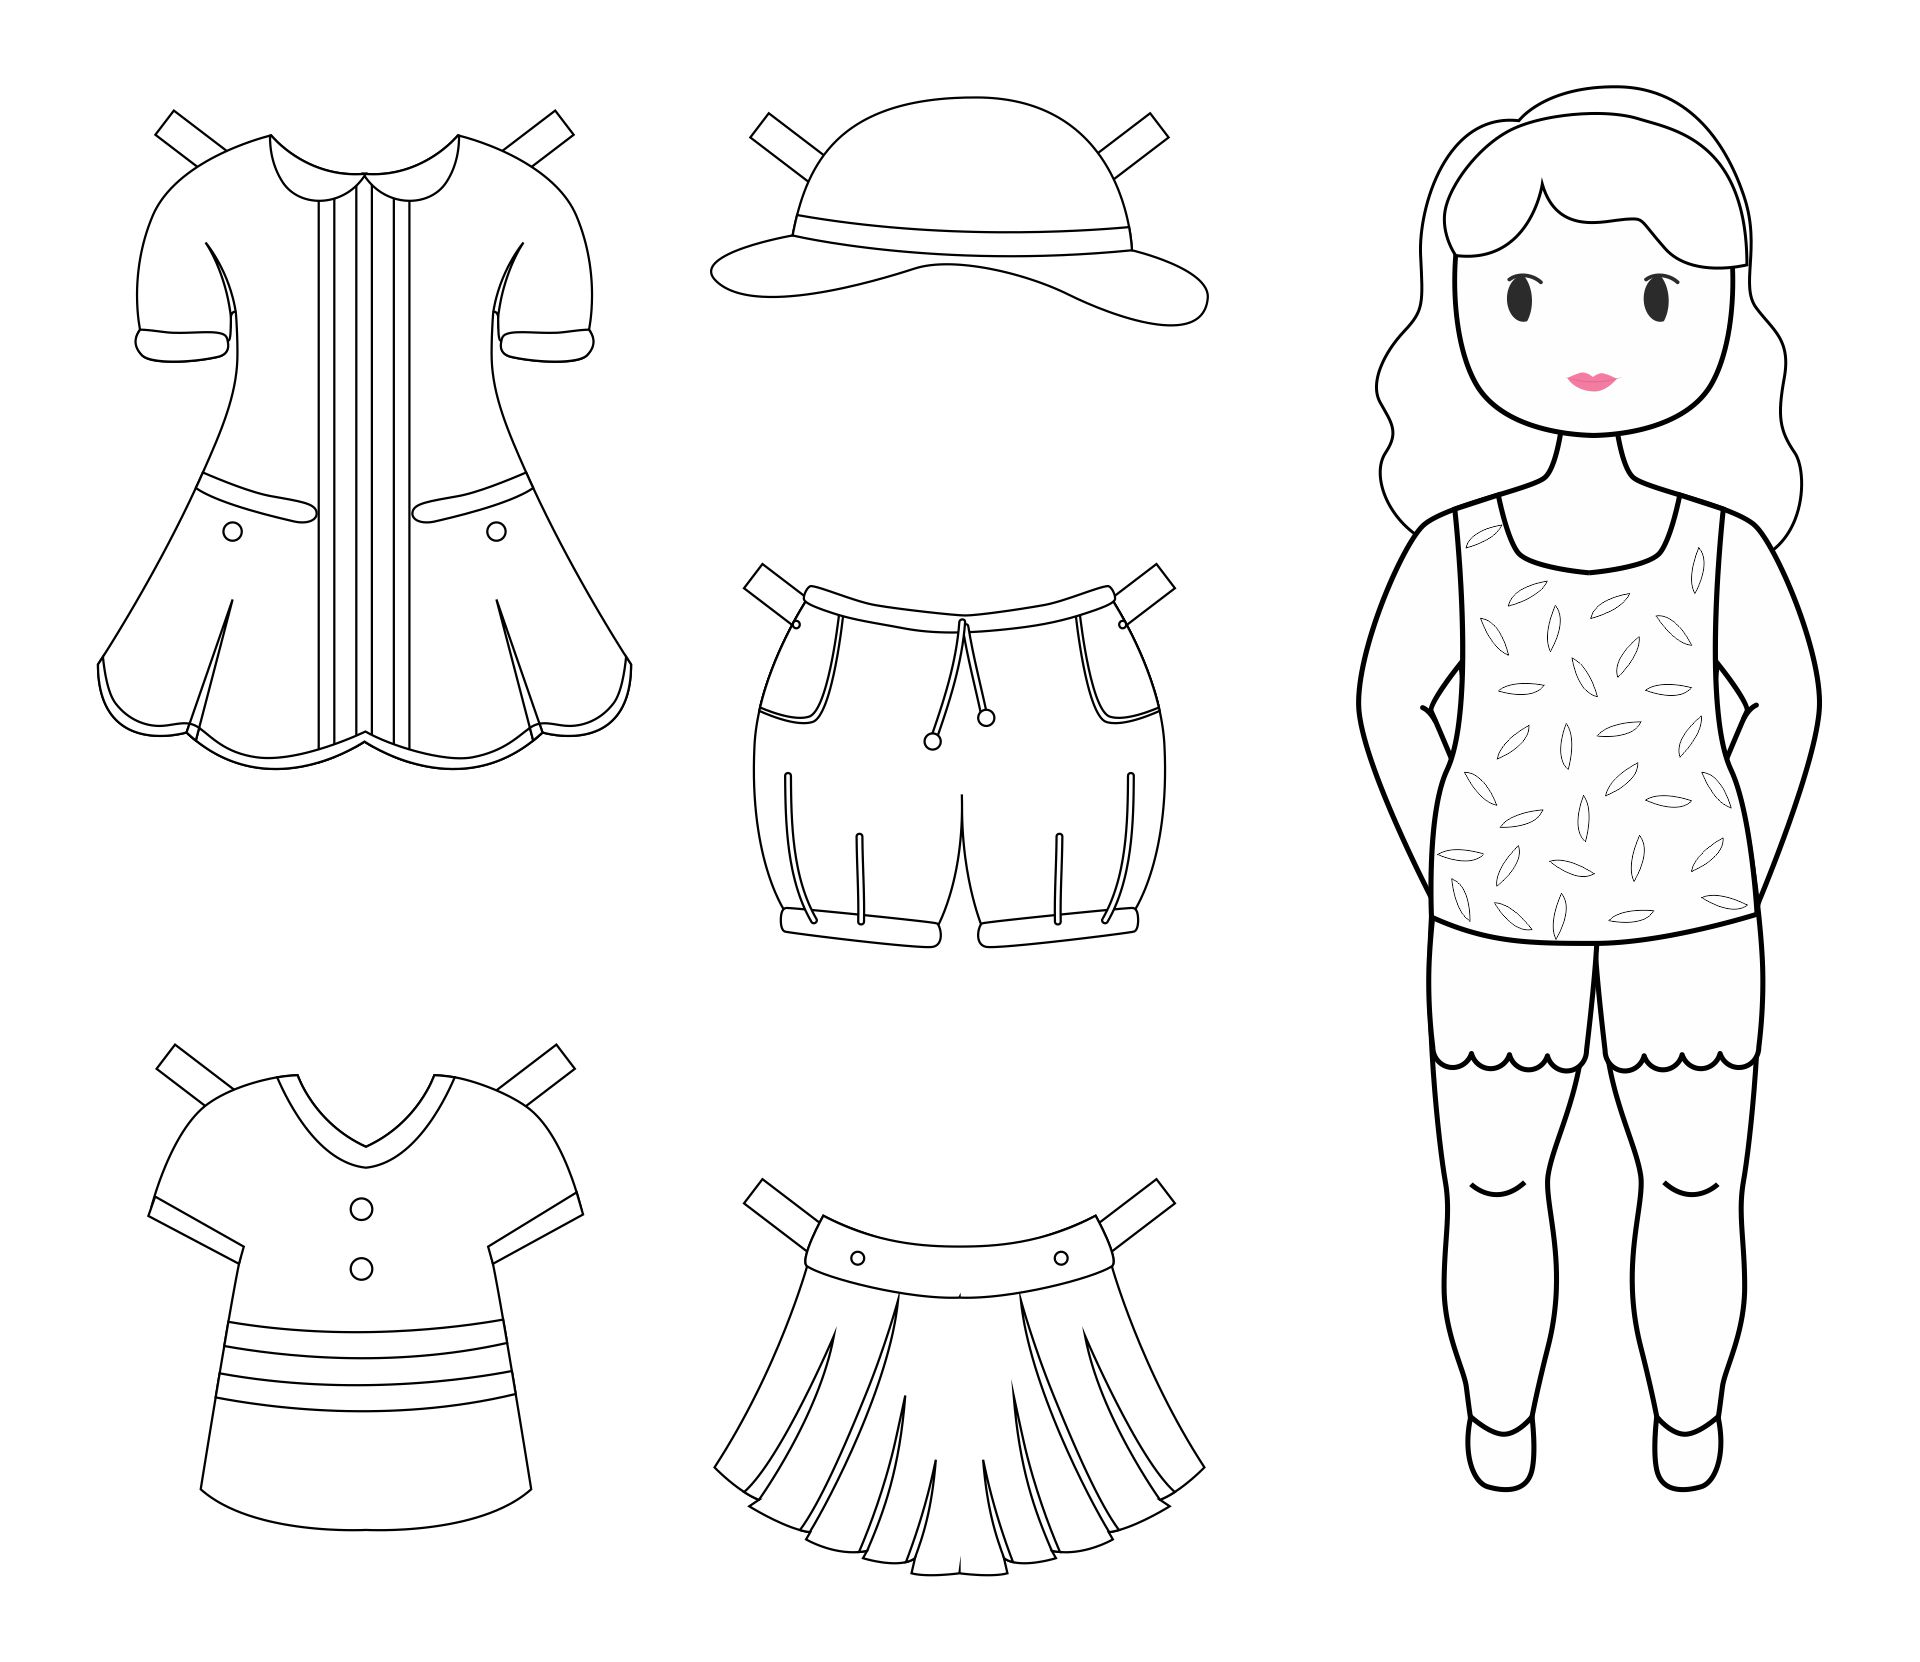 9-best-images-of-printable-paper-dolls-to-color-coloring-paper-dolls-black-printable-paper